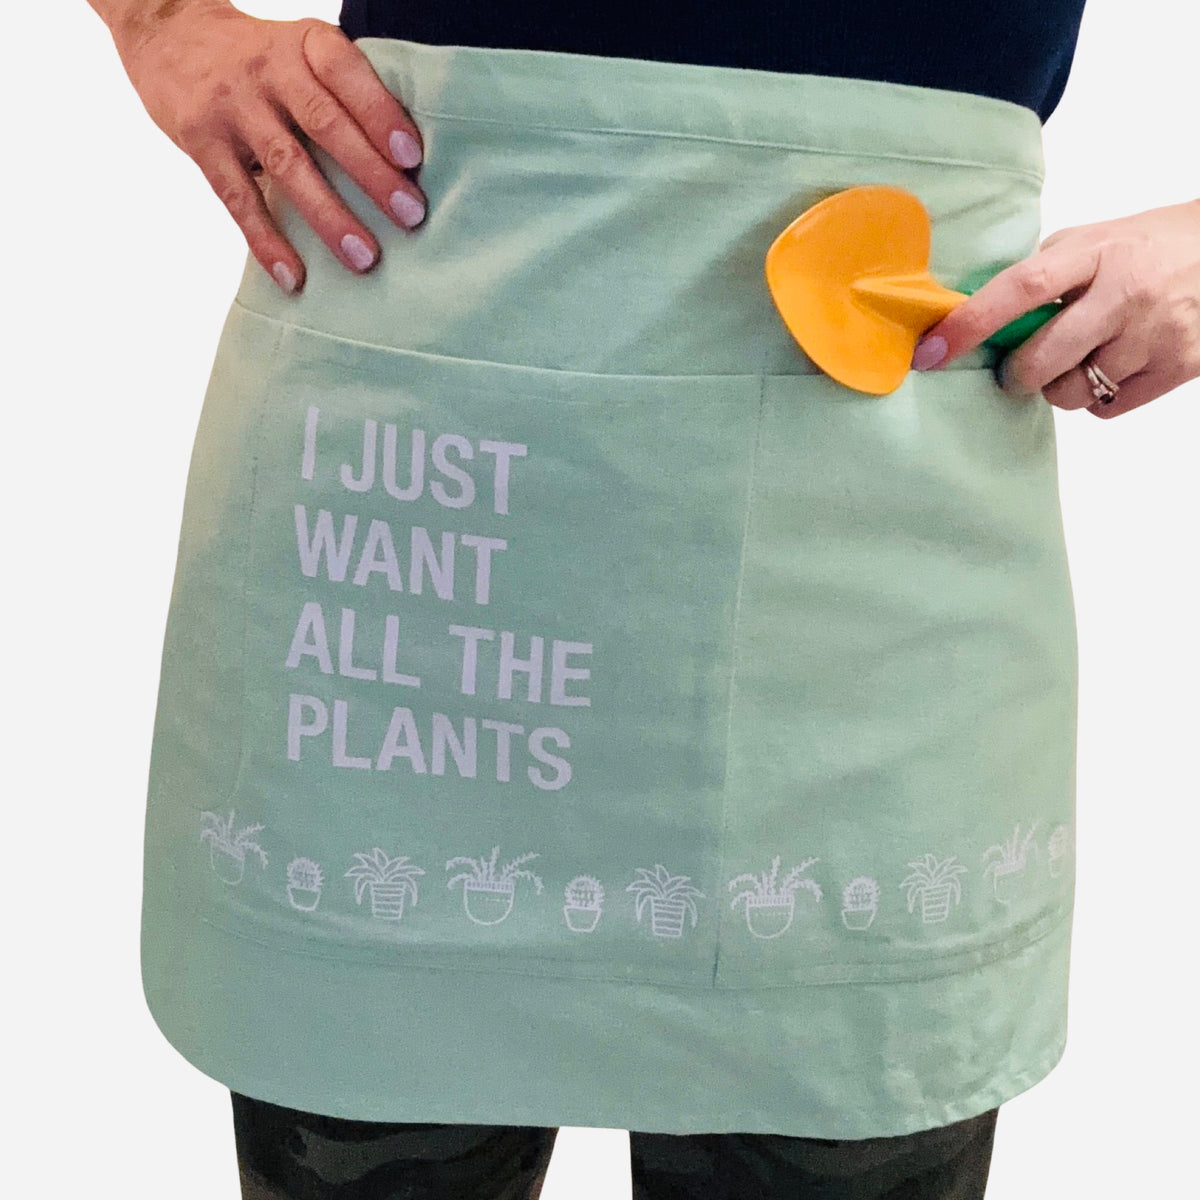 4 Pocket "I Just Want All The Plants" Apron For Gardening - 100% Cotton